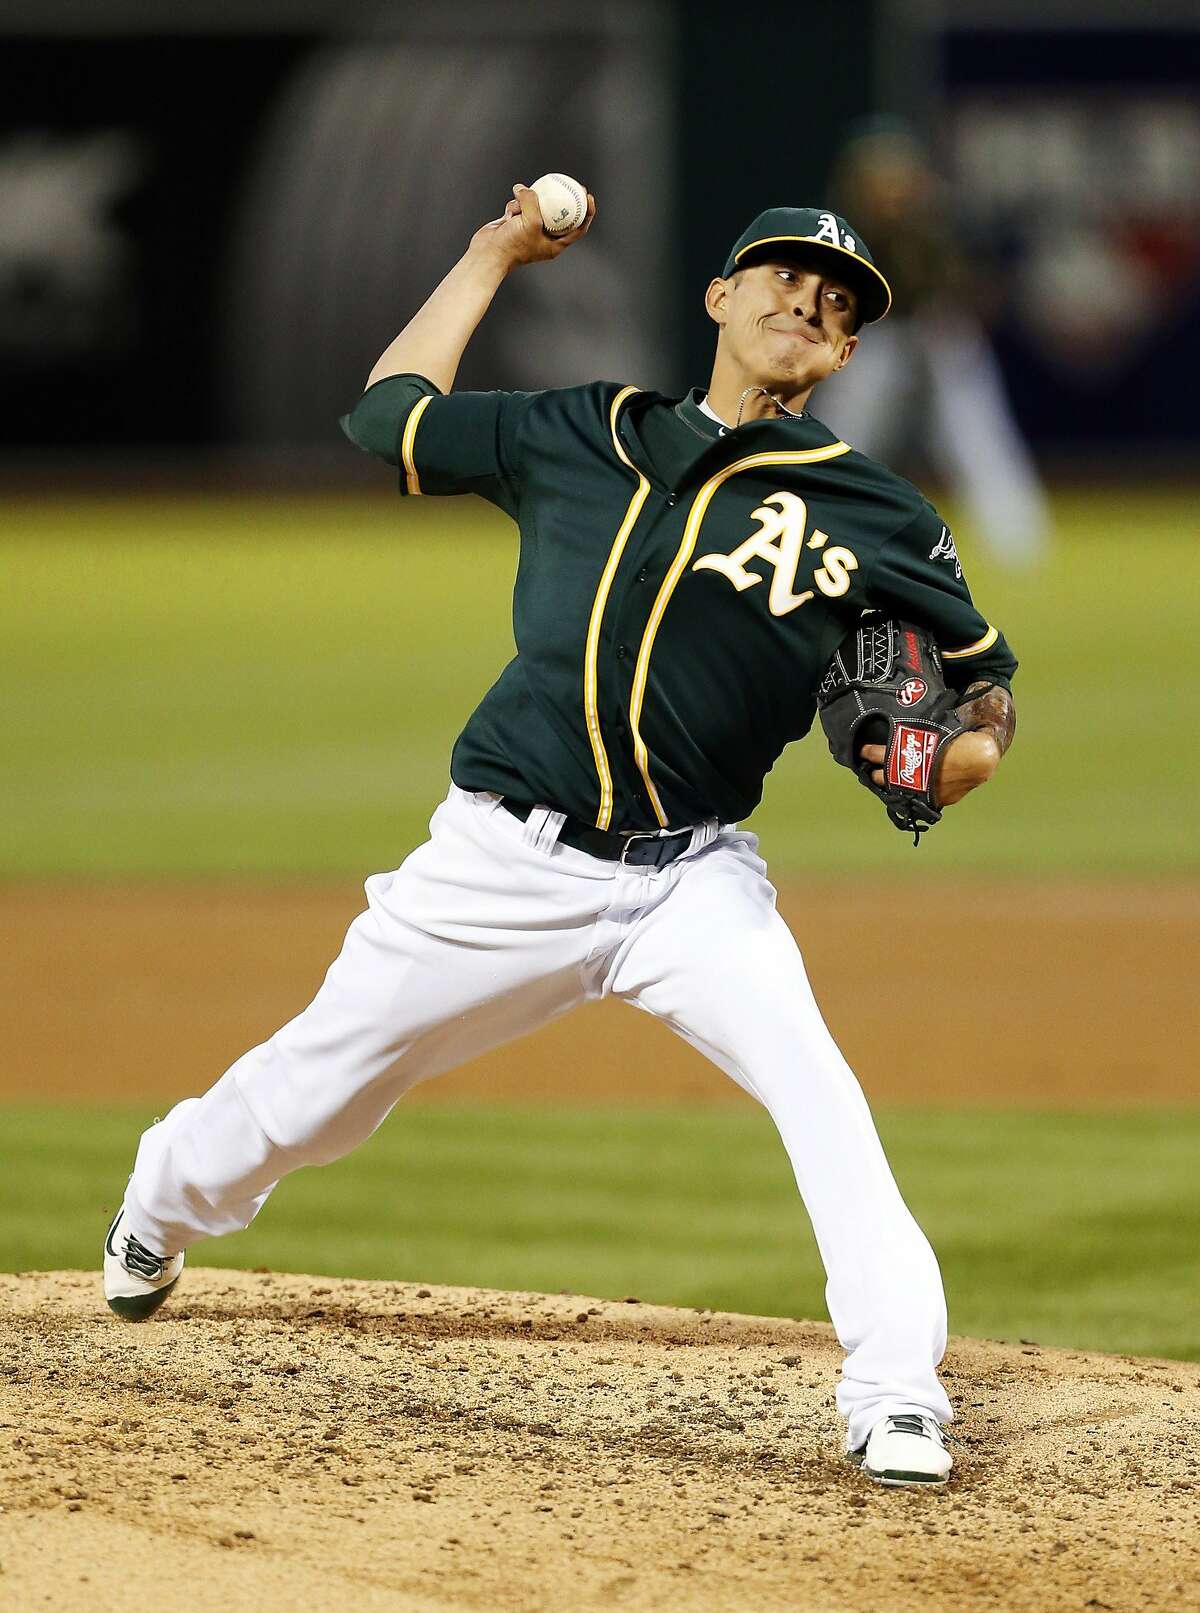 Oakland Athletics pitcher Jesse Chavez throws during the third inning of a baseball game against the Seattle Mariners, Thursday, April 3, 2014, in Oakland, Calif. (AP Photo/Beck Diefenbach)